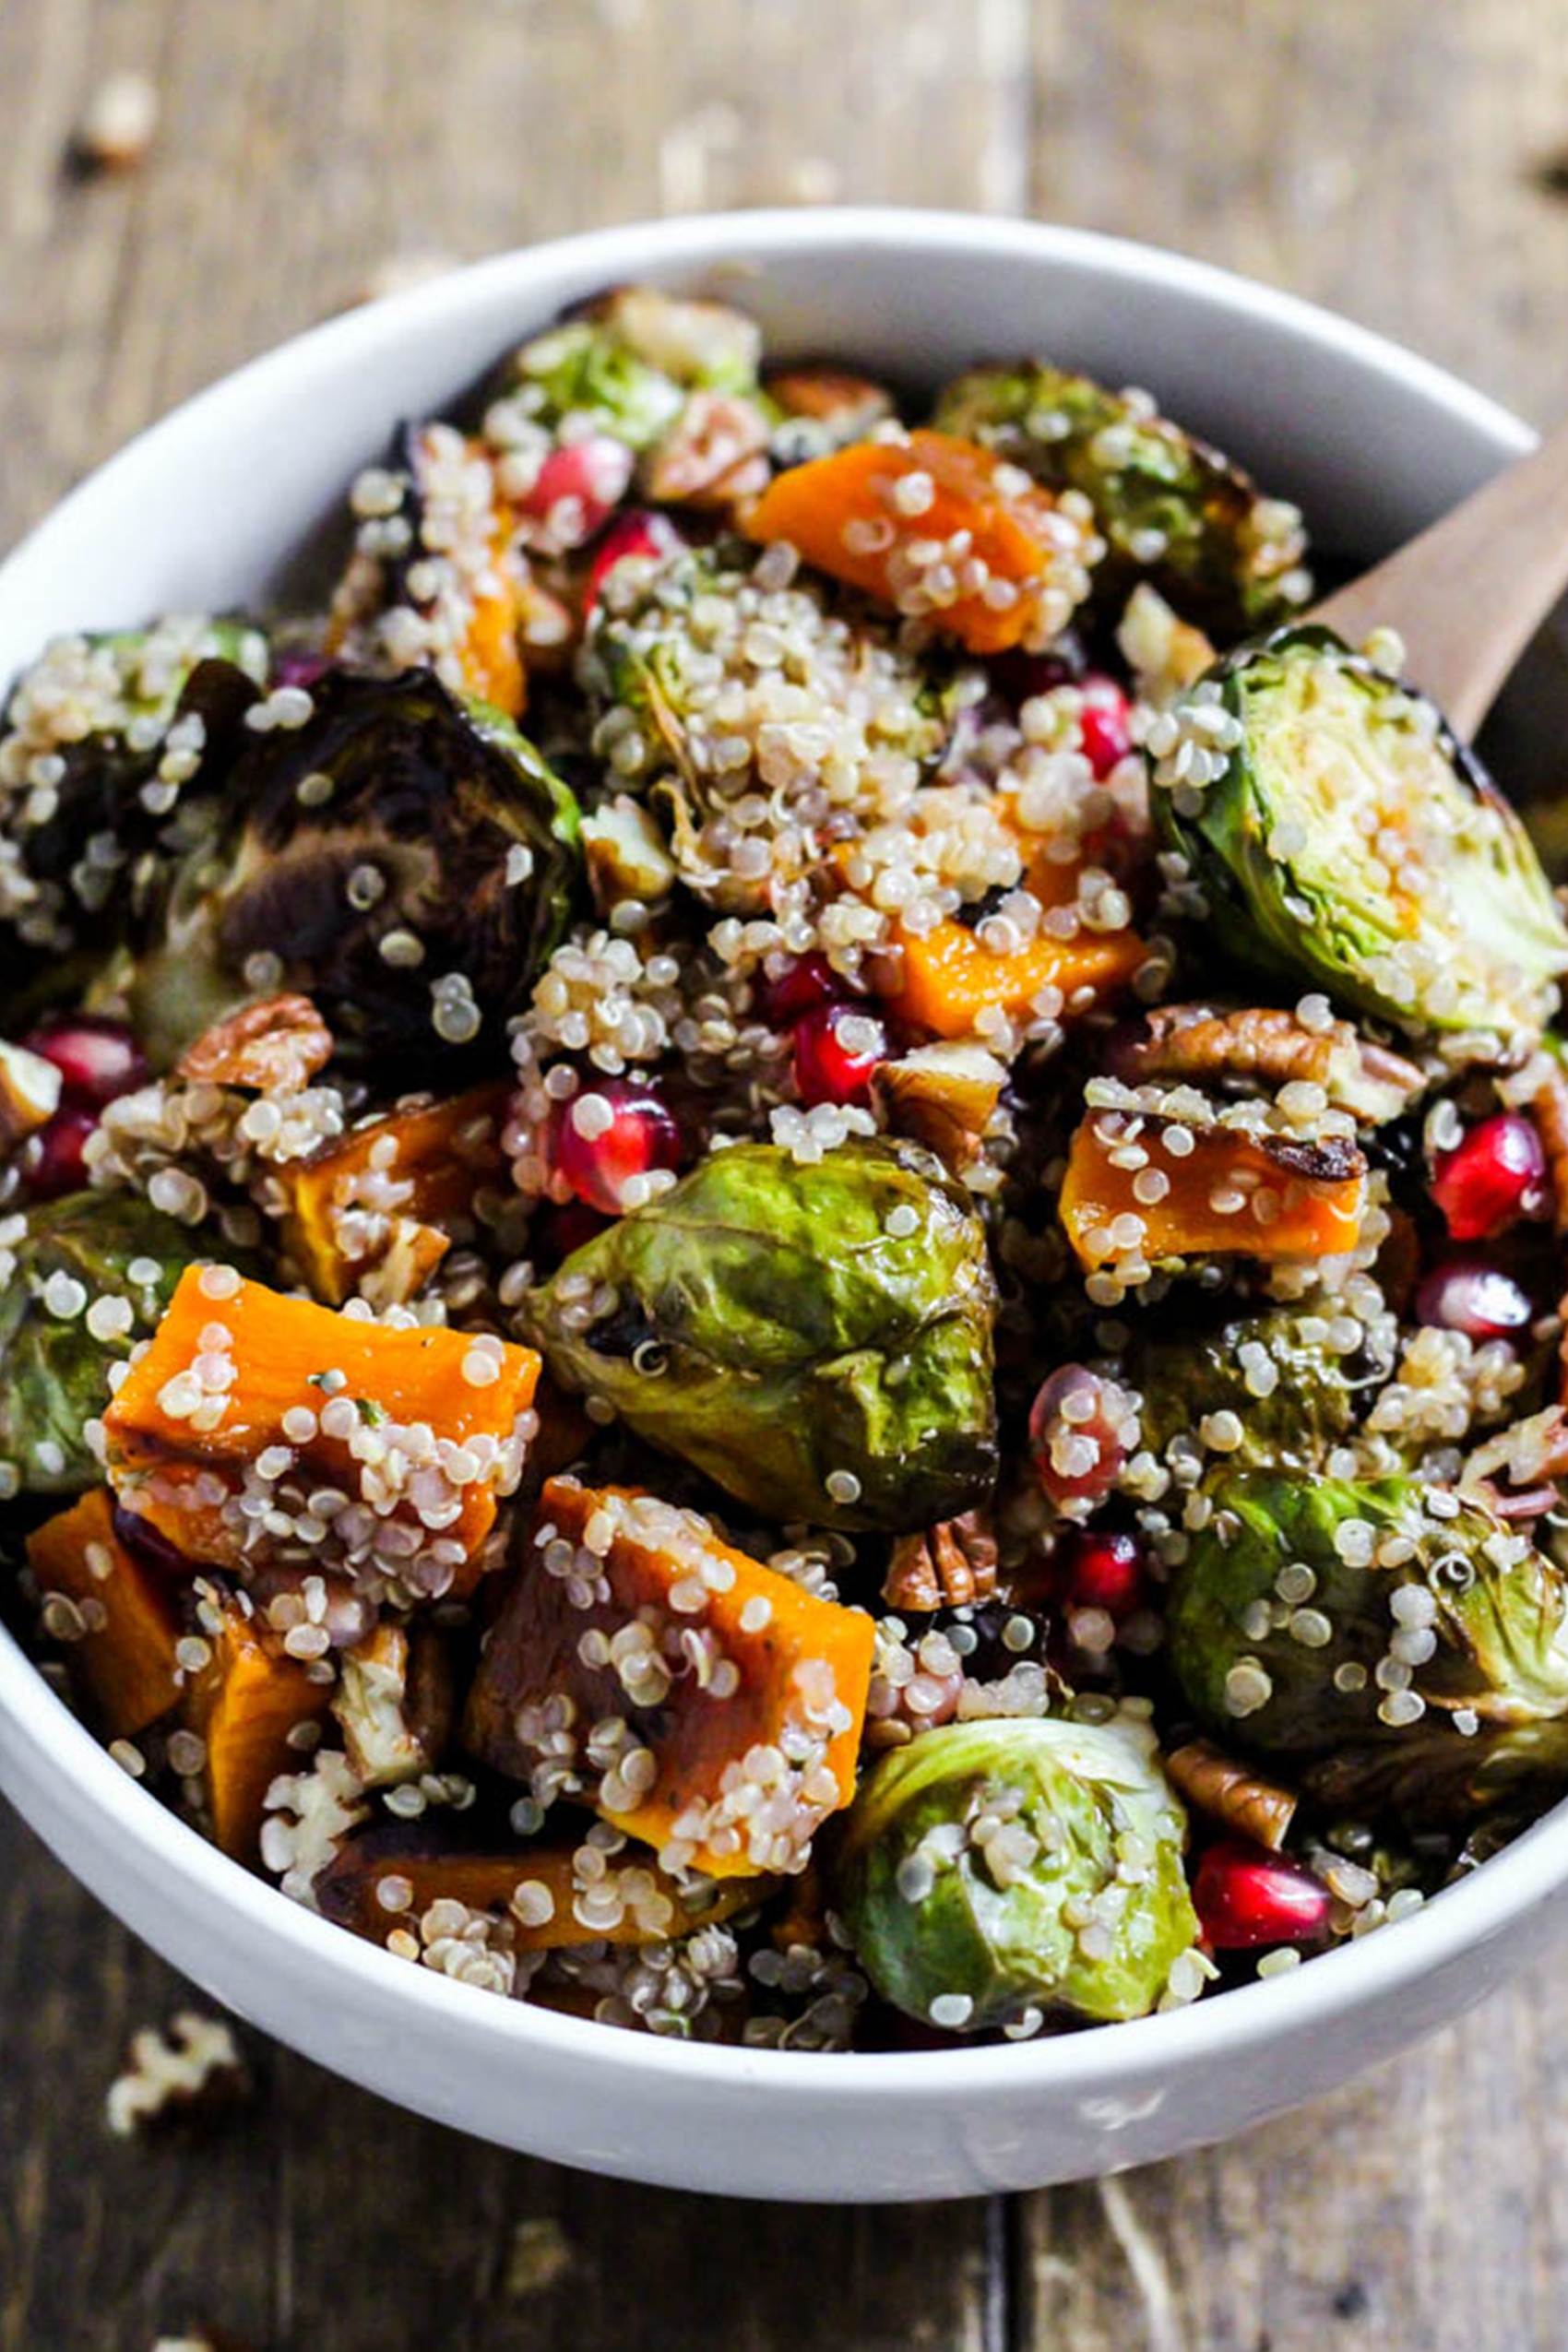 a quinoa salad including brussels sprouts, pomegranate seeds, and squash